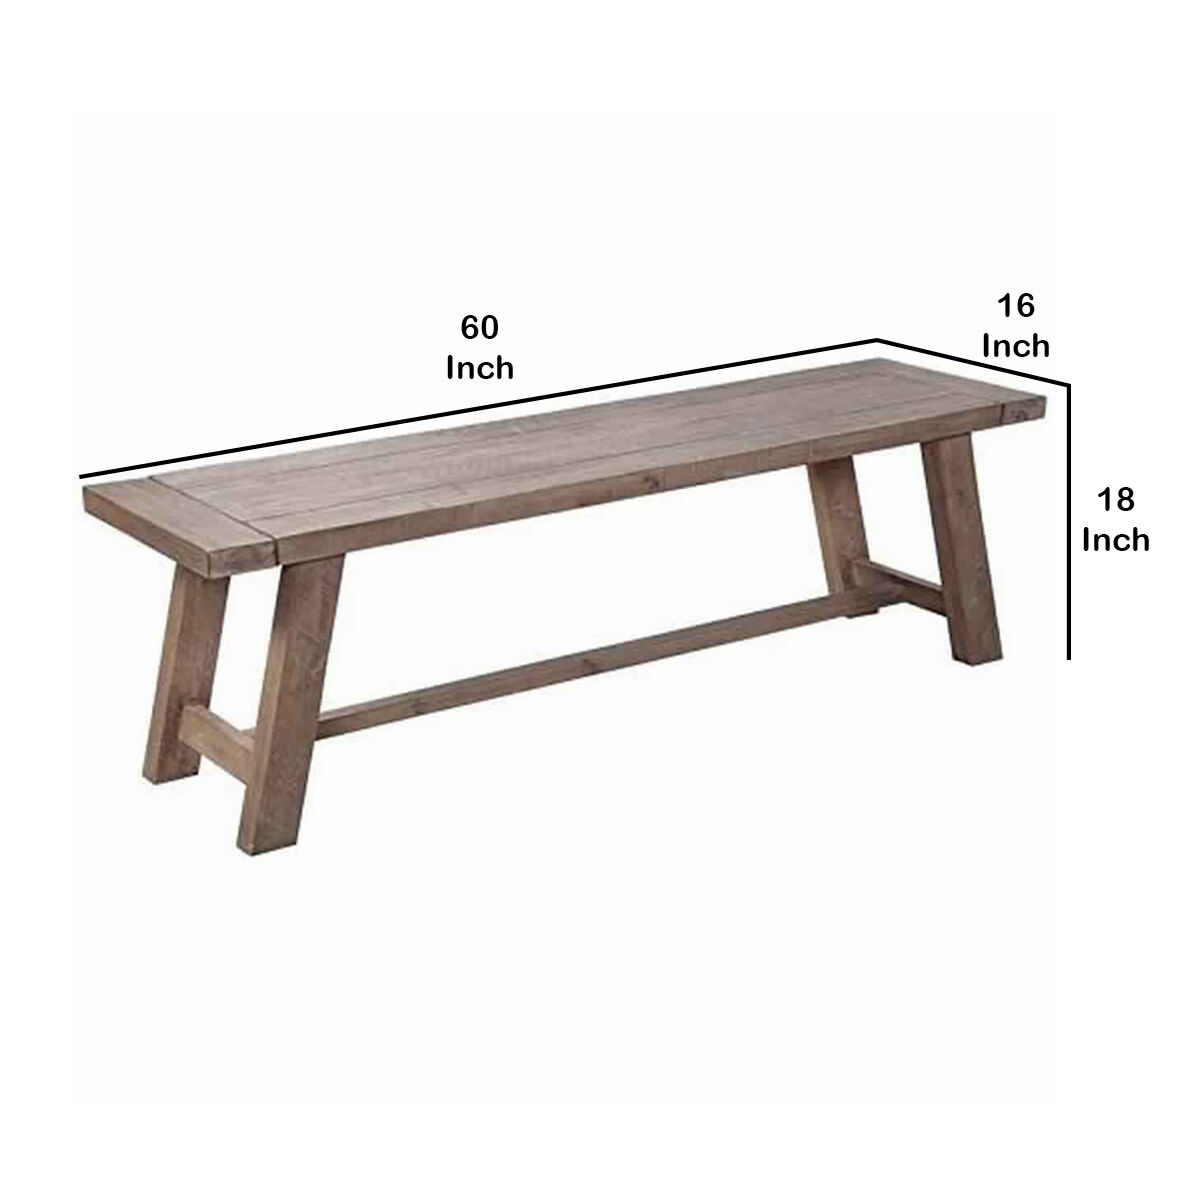 Farmhouse Wooden Dining Bench with Grain Details and Plank Top, Brown